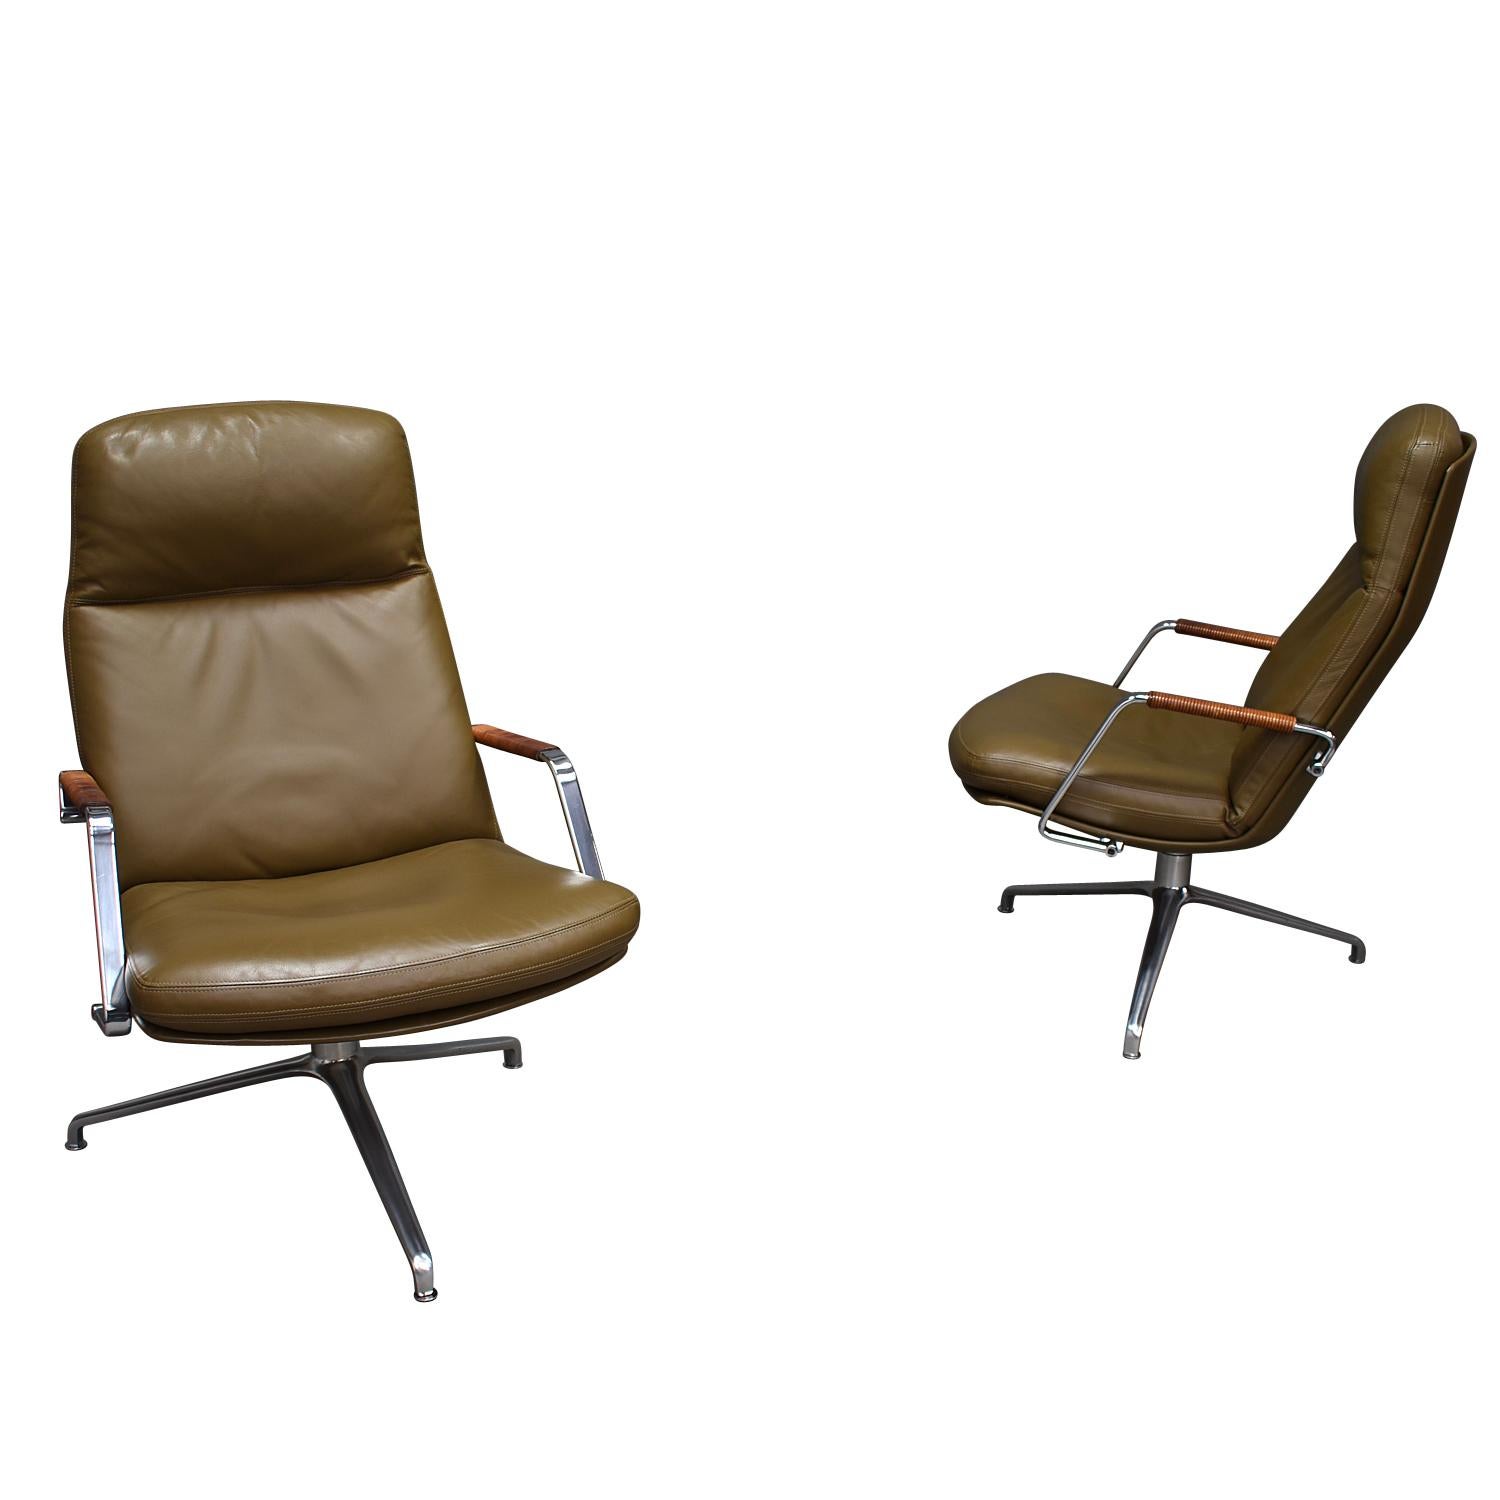 Gorgeous and elegant pair of FK-86 lounge chairs in olive green leather by Preben Fabricius and Jørgen Kastholm for Kill International, Denmark / Germany – 1968.

These chairs still remain excellent / mint condition. They have not been used much.